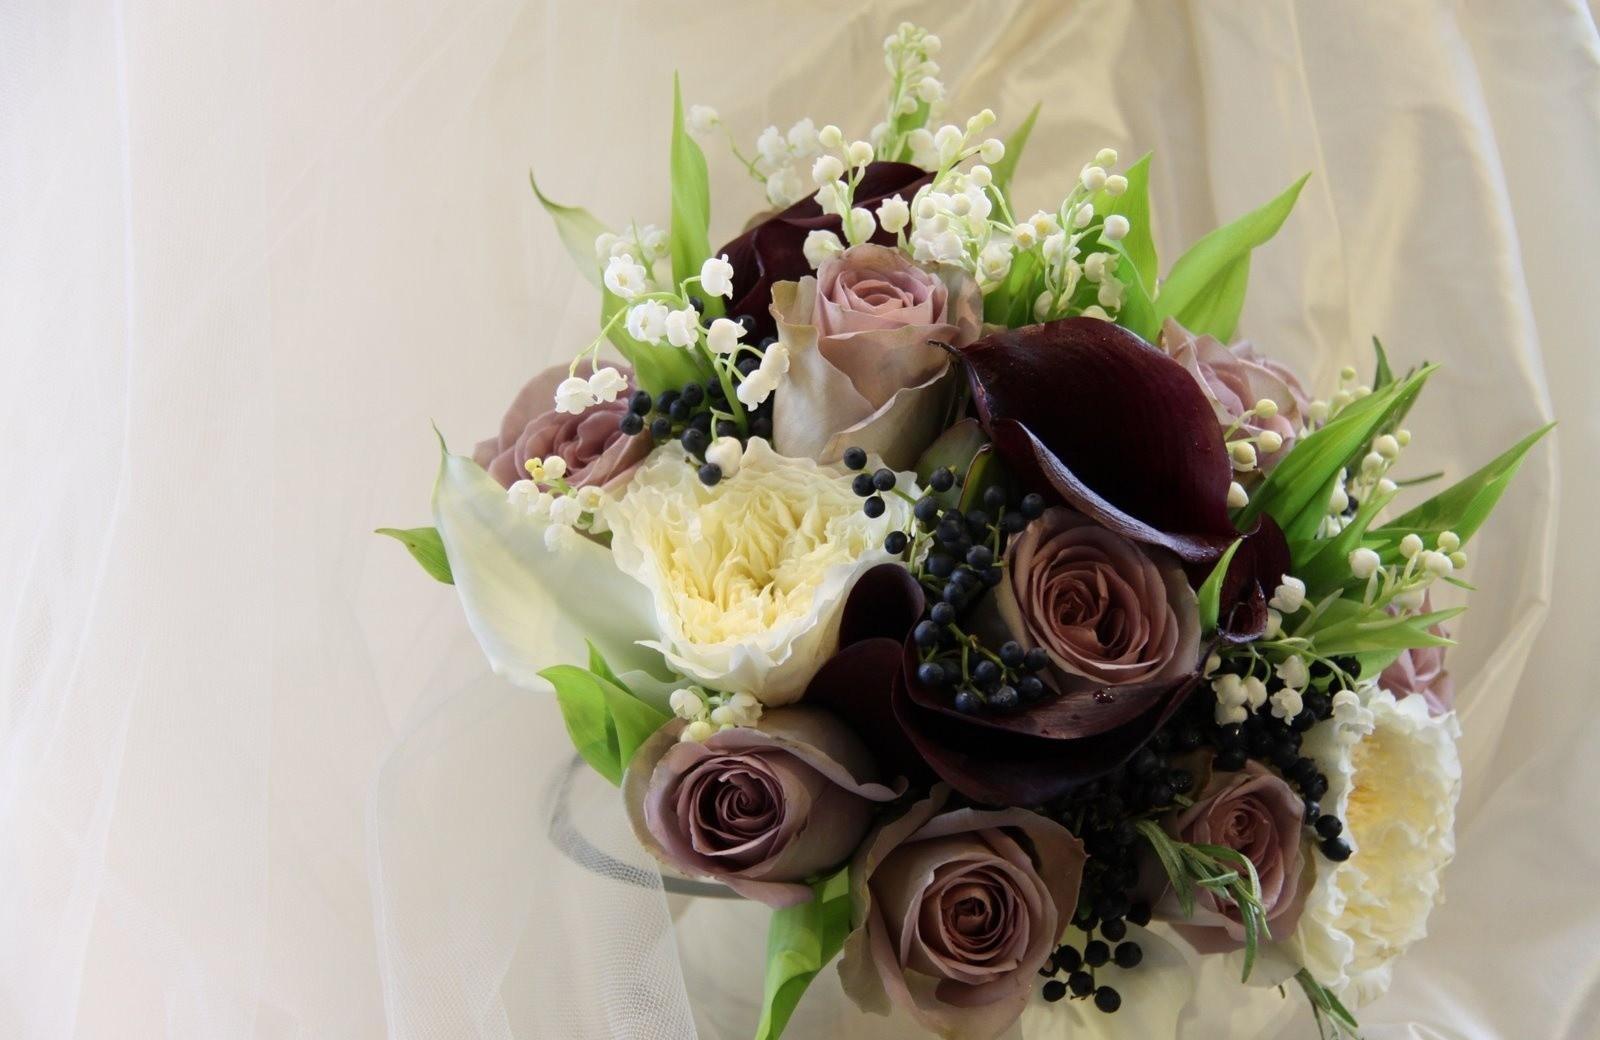 composition, flowers, roses, lily of the valley, bouquet, berry